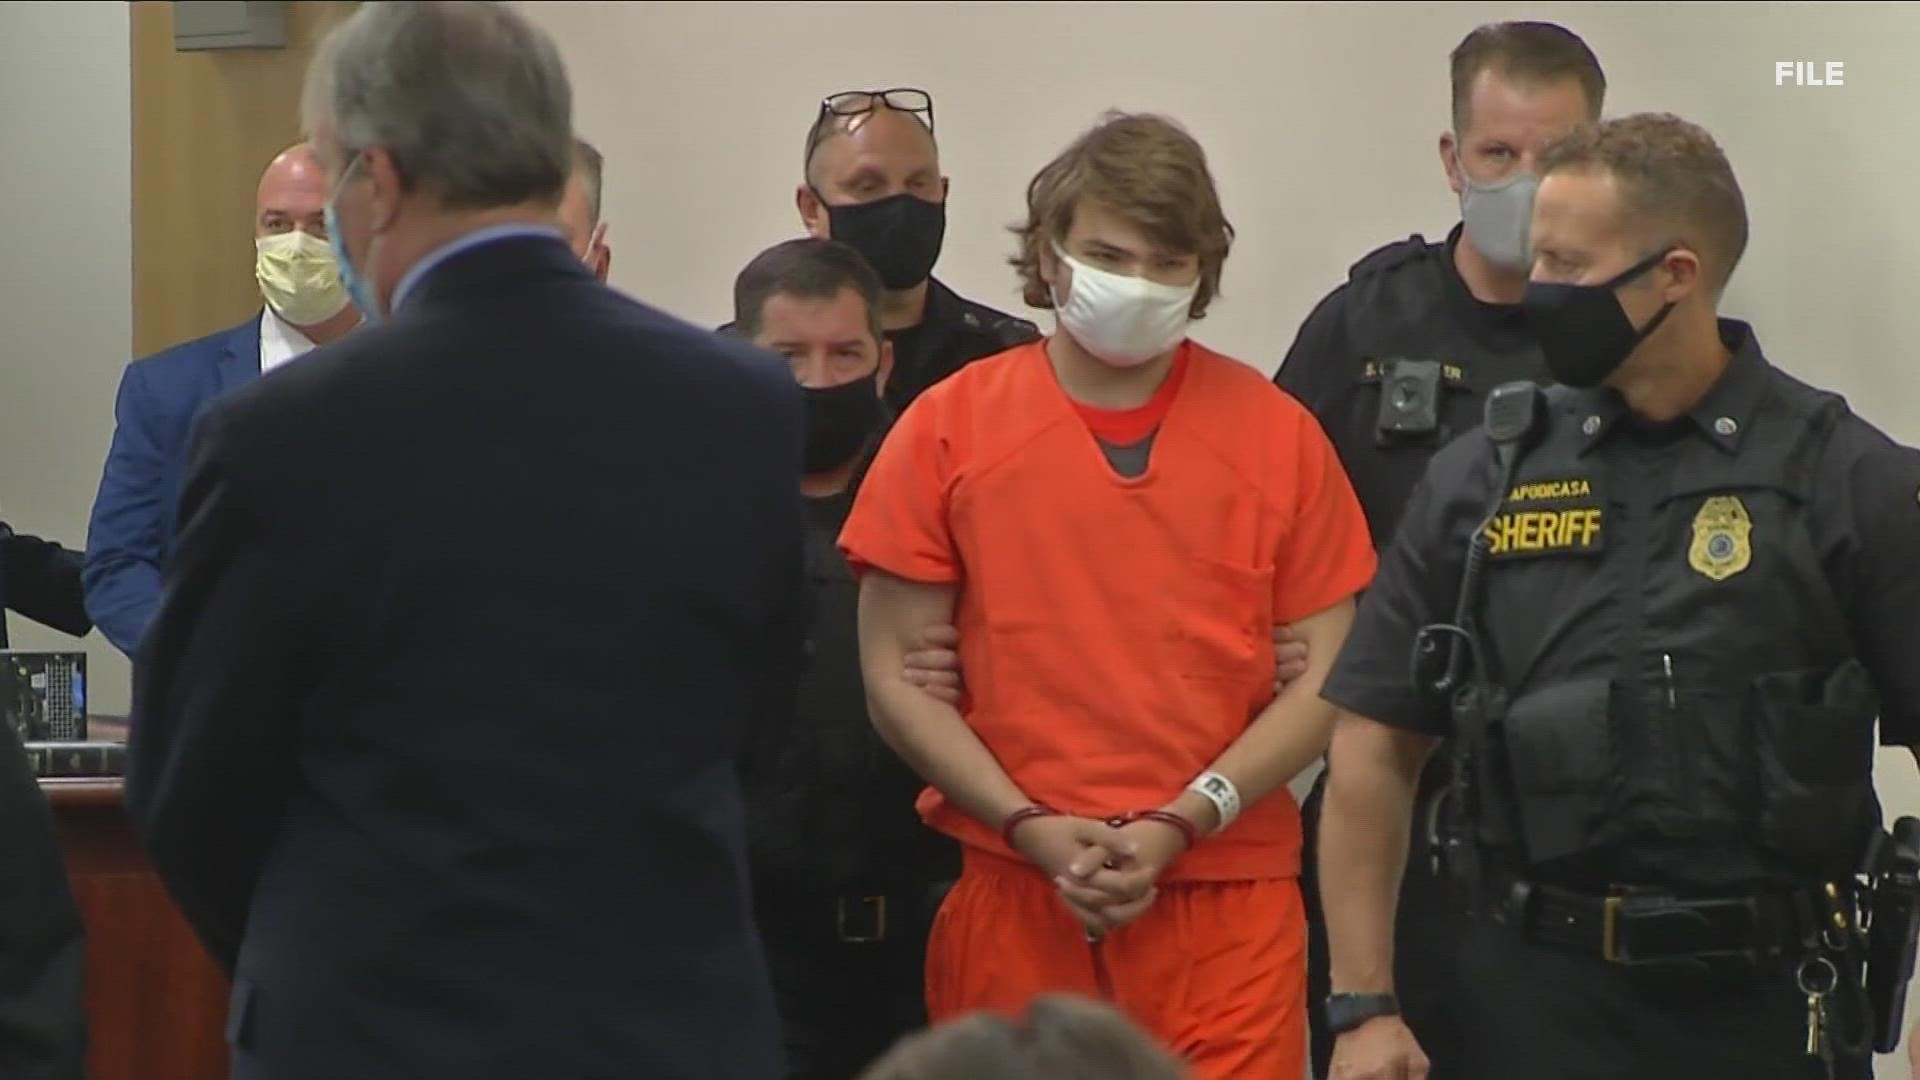 Lawyers for the Tops Shooter miss a Deadline to pursue a Psychiatric Defense